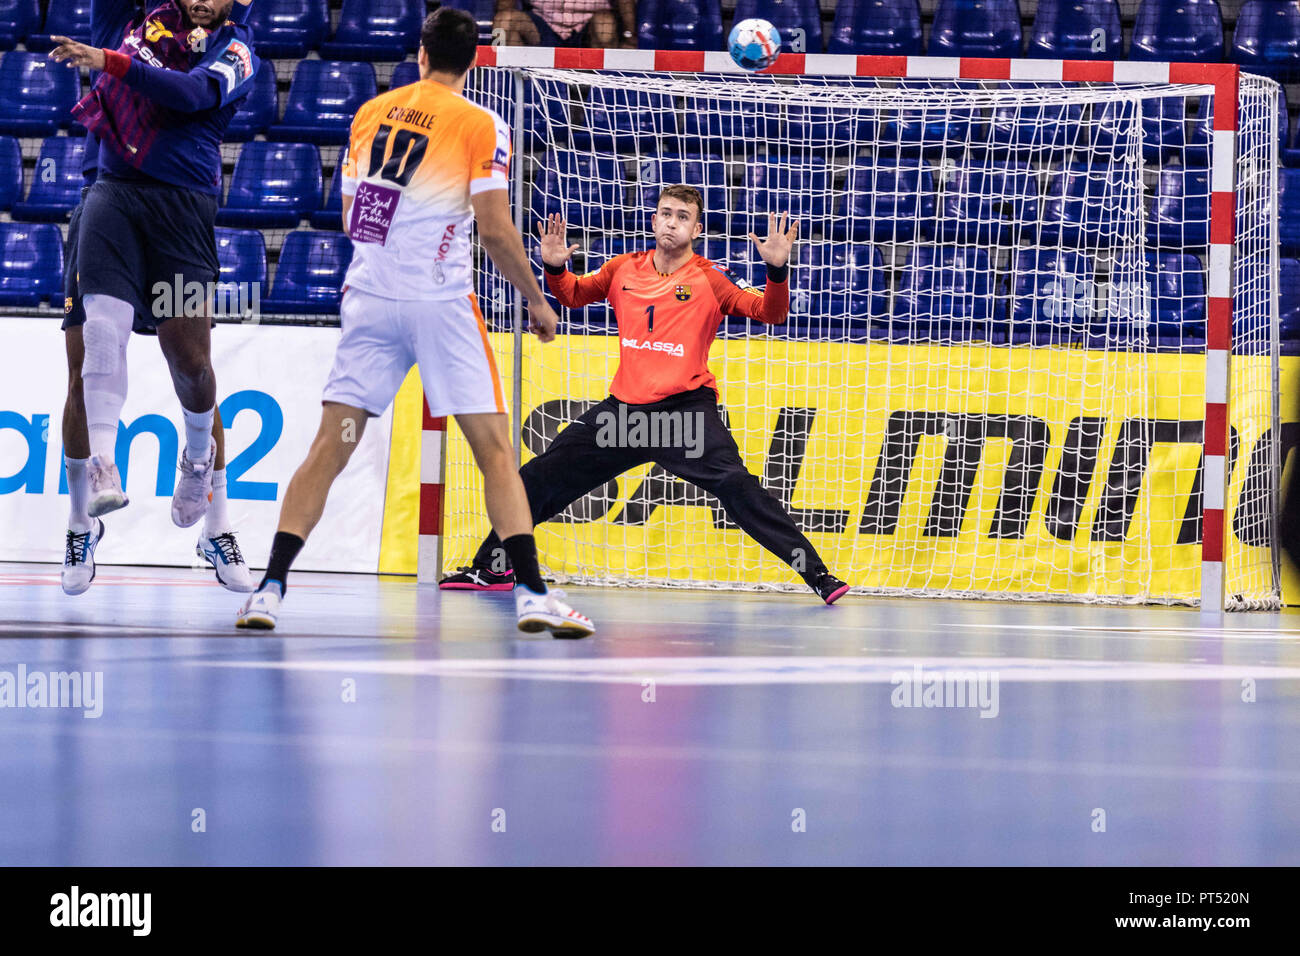 October 6, 2018 - Gonzalo Perez de Vargas Moreno, #1 of FC Barcelona Lassa in actions during VELUX EHF Champions League match between Fc Barcelona Lassa and Montpellier HB on October 06, 2018 at Palau Blaugrana, in Barcelona, Spain. Credit: AFP7/ZUMA Wire/Alamy Live News Stock Photo